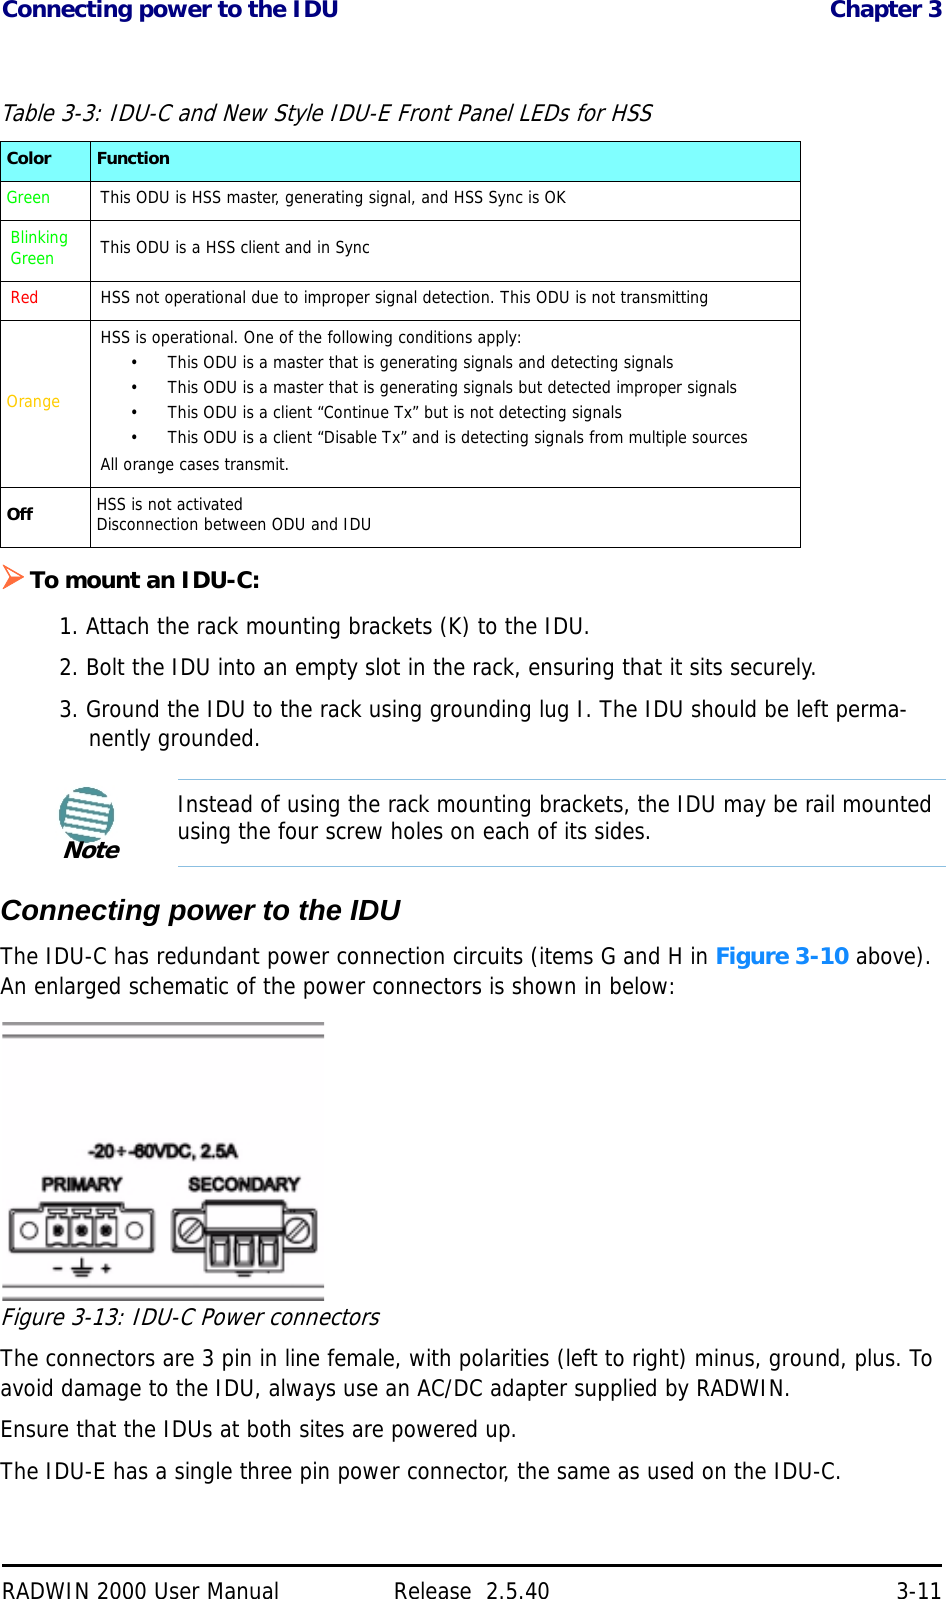 Connecting power to the IDU Chapter 3RADWIN 2000 User Manual Release  2.5.40 3-11To mount an IDU-C:1. Attach the rack mounting brackets (K) to the IDU.2. Bolt the IDU into an empty slot in the rack, ensuring that it sits securely.3. Ground the IDU to the rack using grounding lug I. The IDU should be left perma-nently grounded.Connecting power to the IDUThe IDU-C has redundant power connection circuits (items G and H in Figure 3-10 above). An enlarged schematic of the power connectors is shown in below:Figure 3-13: IDU-C Power connectorsThe connectors are 3 pin in line female, with polarities (left to right) minus, ground, plus. To avoid damage to the IDU, always use an AC/DC adapter supplied by RADWIN.Ensure that the IDUs at both sites are powered up.The IDU-E has a single three pin power connector, the same as used on the IDU-C.Table 3-3: IDU-C and New Style IDU-E Front Panel LEDs for HSSColor FunctionGreen This ODU is HSS master, generating signal, and HSS Sync is OKBlinking Green This ODU is a HSS client and in SyncRed HSS not operational due to improper signal detection. This ODU is not transmittingOrangeHSS is operational. One of the following conditions apply:• This ODU is a master that is generating signals and detecting signals• This ODU is a master that is generating signals but detected improper signals• This ODU is a client “Continue Tx” but is not detecting signals• This ODU is a client “Disable Tx” and is detecting signals from multiple sourcesAll orange cases transmit.Off HSS is not activatedDisconnection between ODU and IDUNoteInstead of using the rack mounting brackets, the IDU may be rail mounted using the four screw holes on each of its sides.